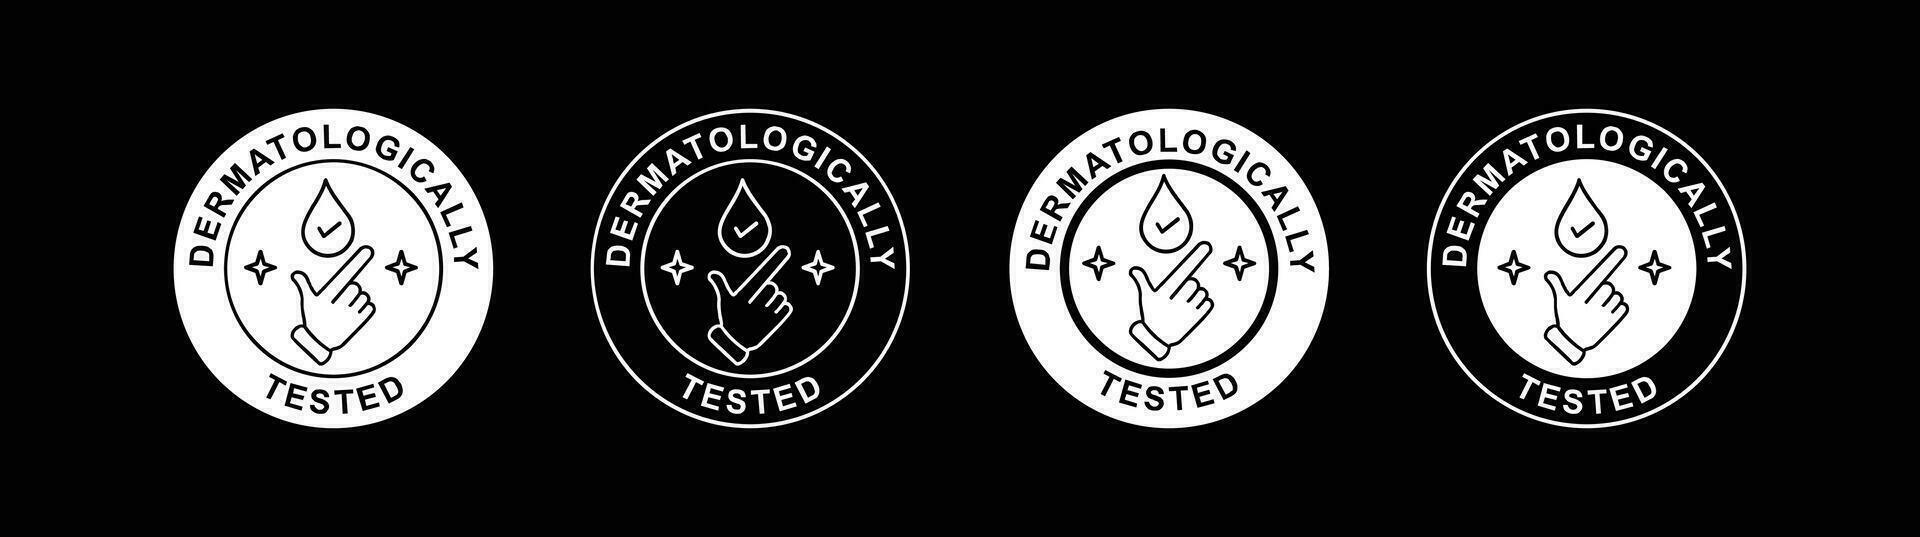 Dermatologically tested icon in line style vector label with water drop. Dermatology dermatologist clinic icon  hand with water logo  concept on black background